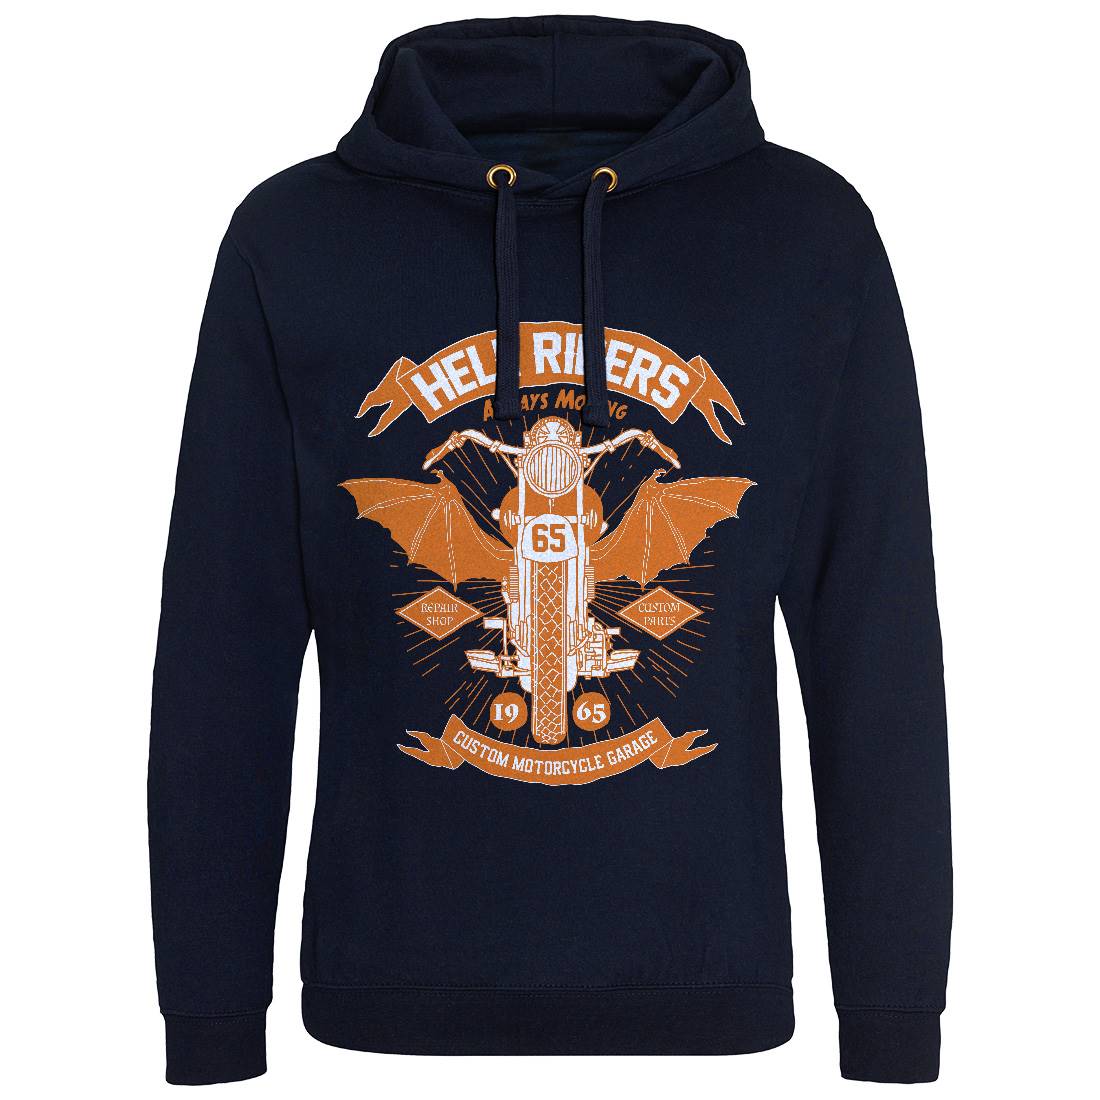 Hell Riders Mens Hoodie Without Pocket Motorcycles A992